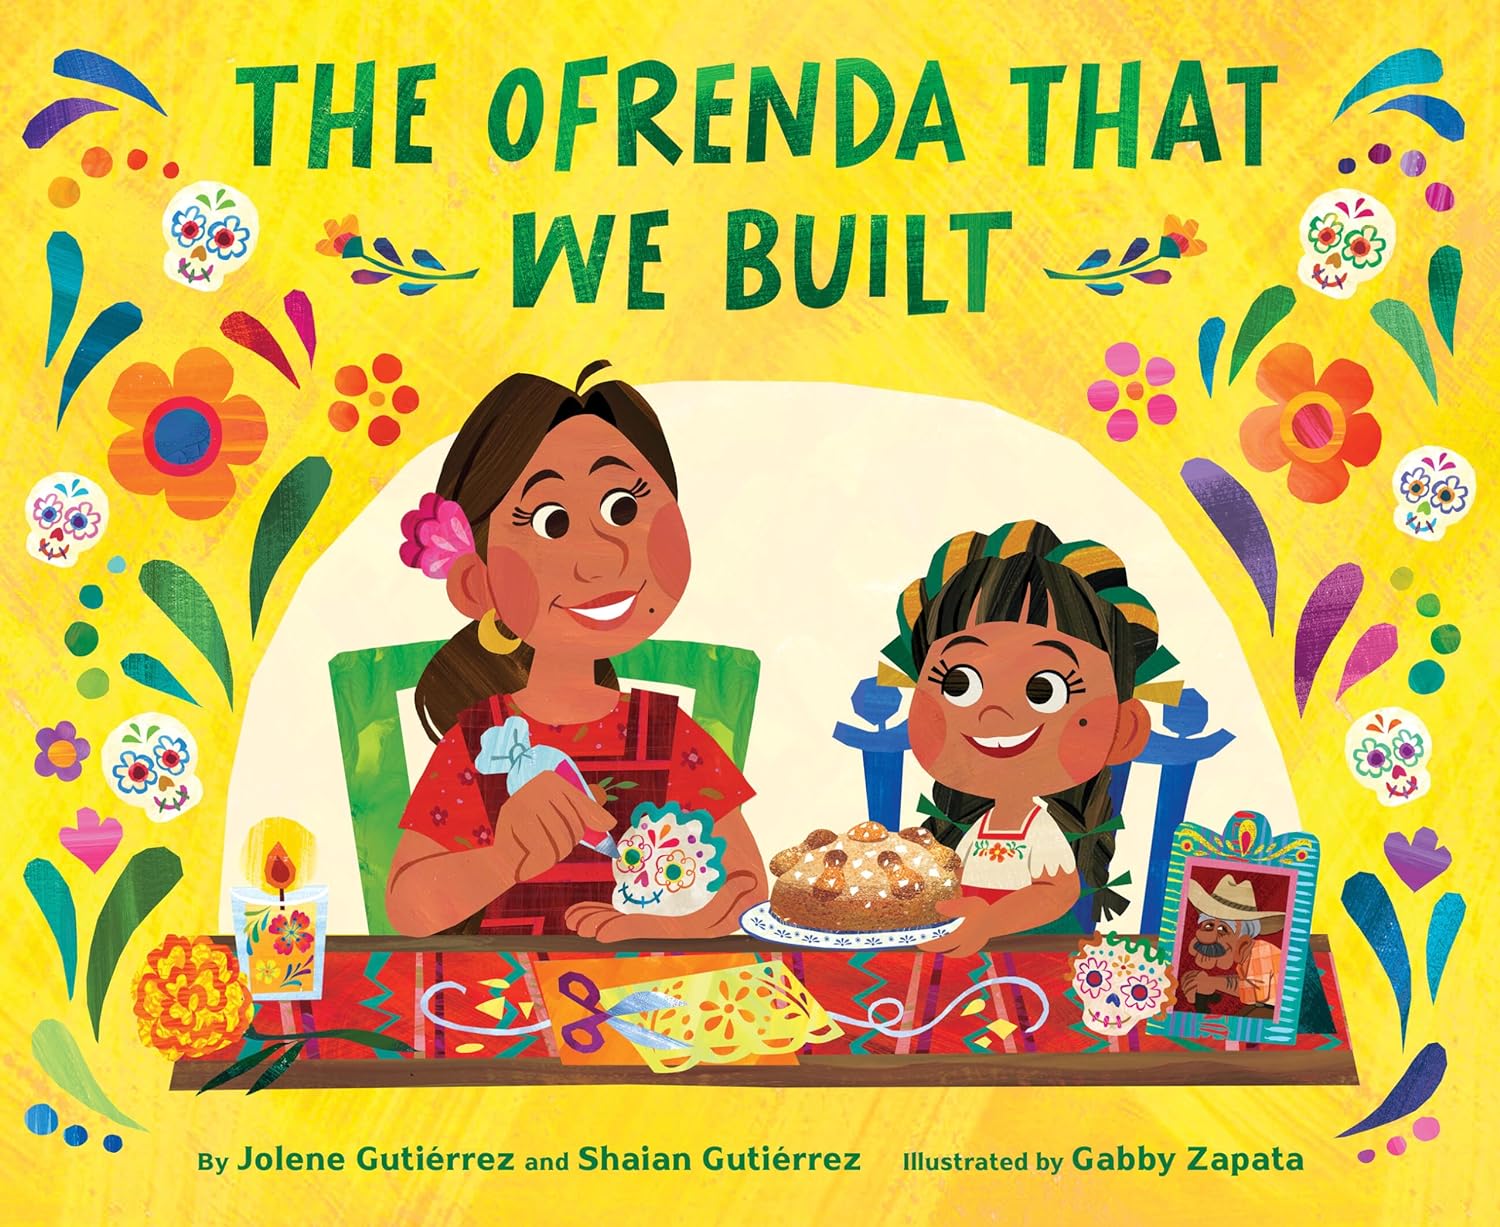 A yellow picture book cover depicting a smiling Latine woman and girl decorating an ofrenda for Día de Muertos using colorful candy skulls, candles, pan dulce, papel picado, flowers, and photos.